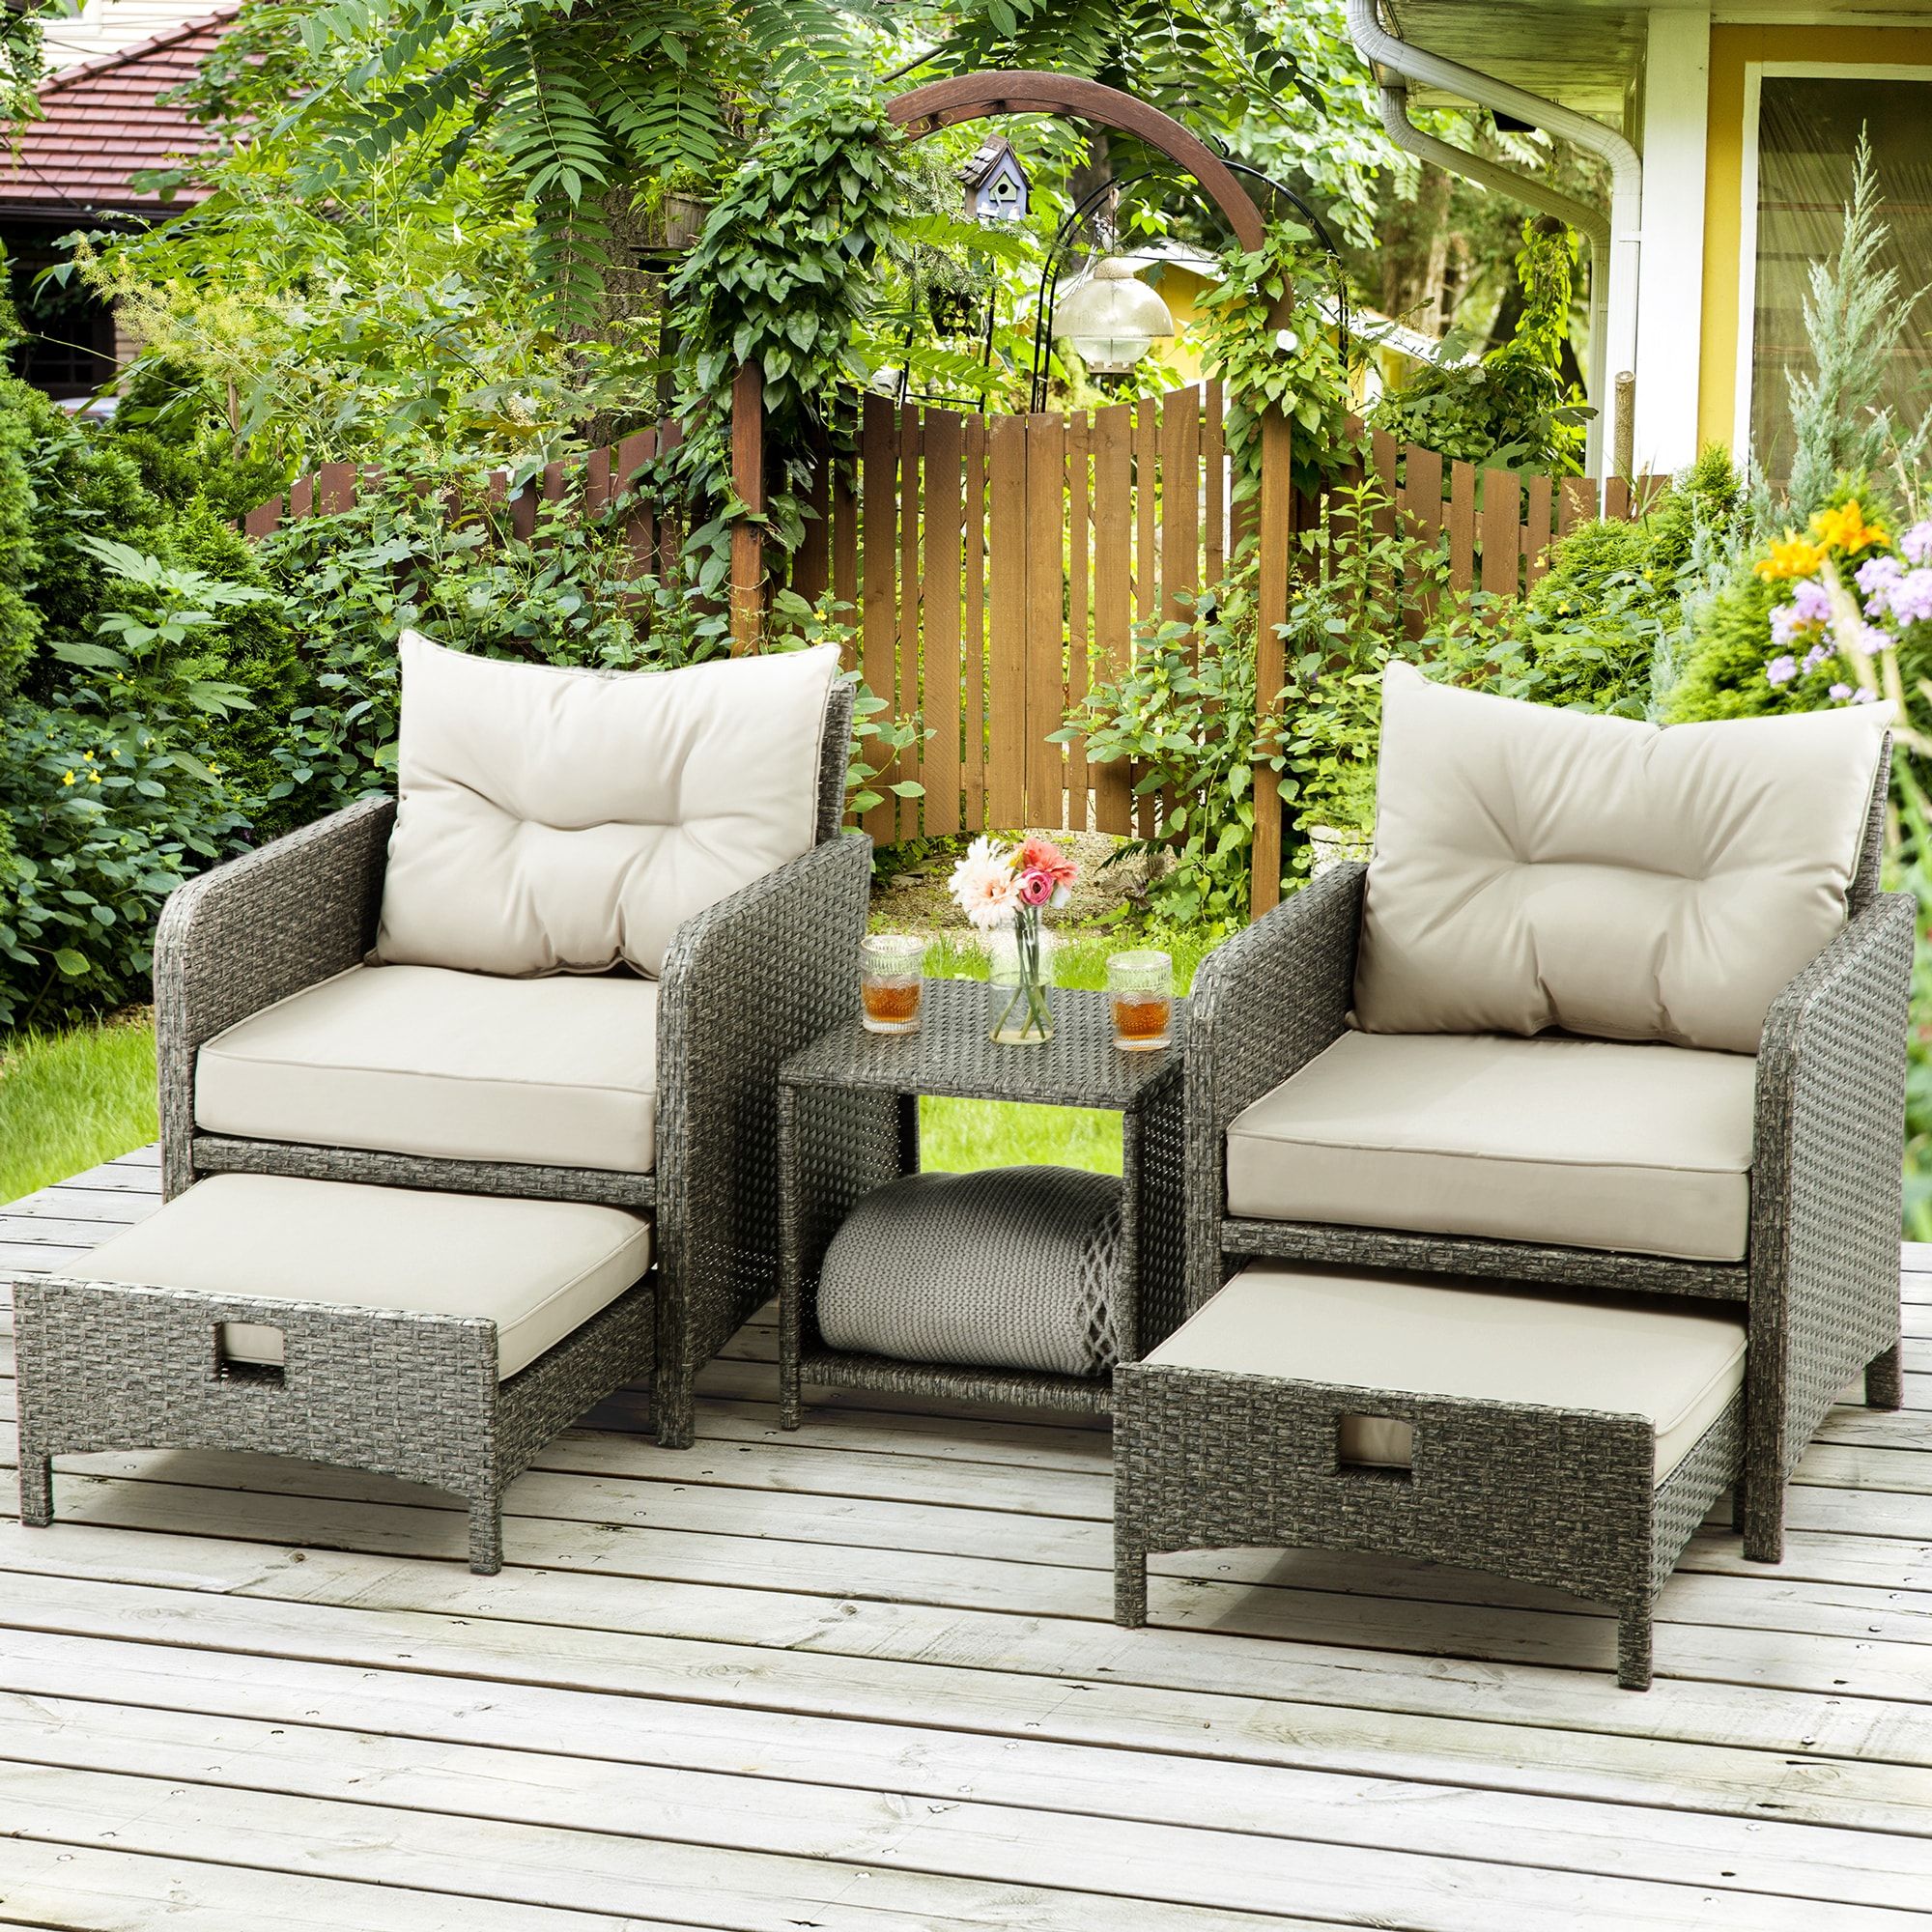 Featured Photo of The 15 Best Collection of 5 Piece Patio Furniture Set